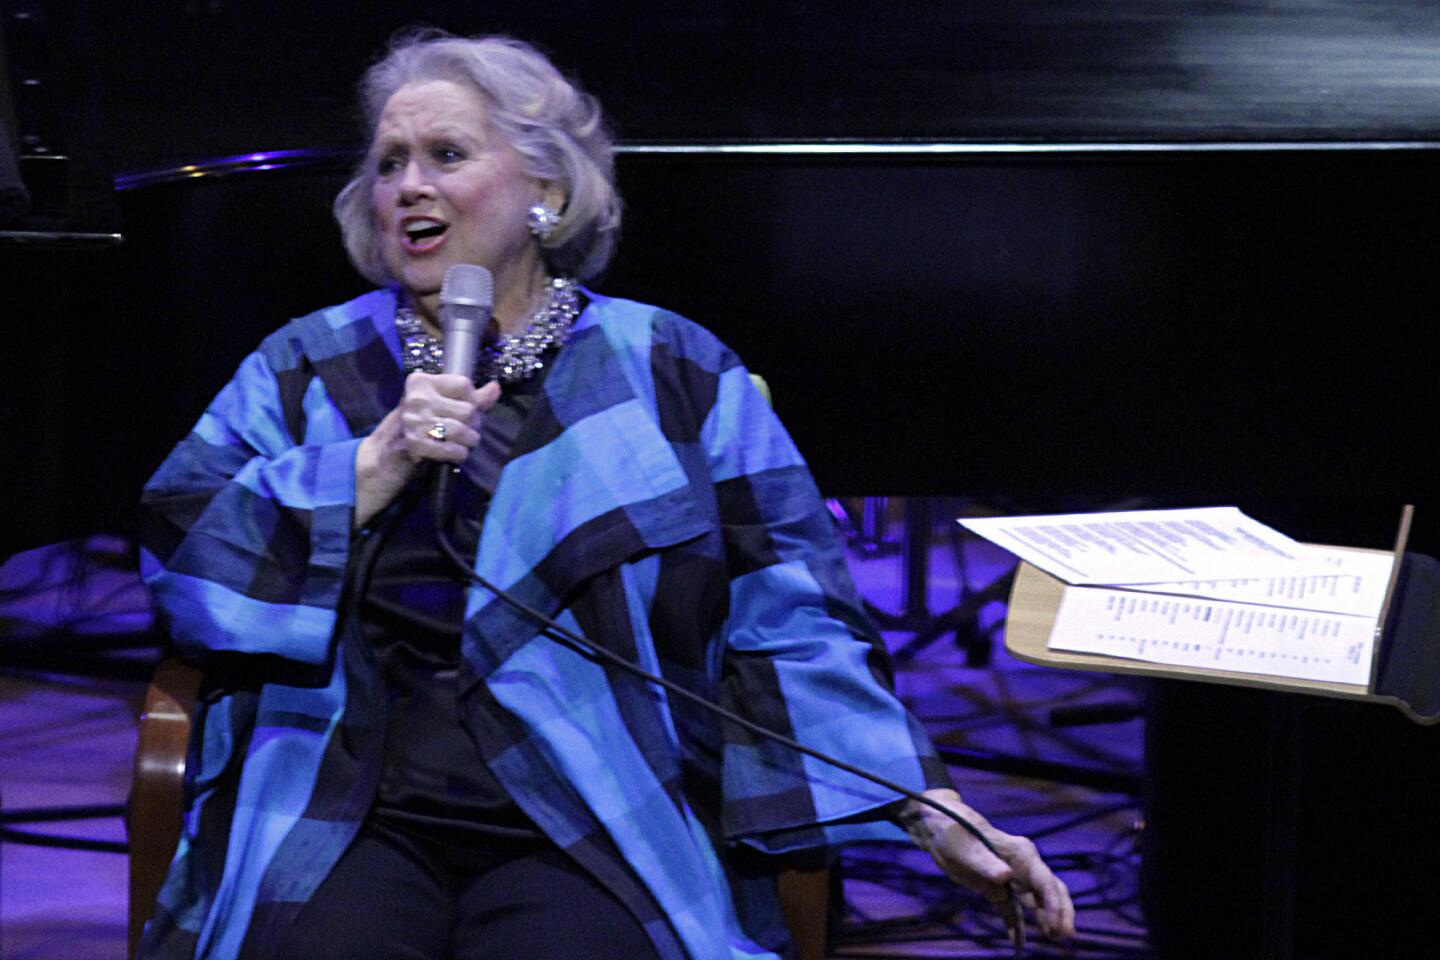 Arts and culture in pictures by The Times | Barbara Cook with the L.A. Phil